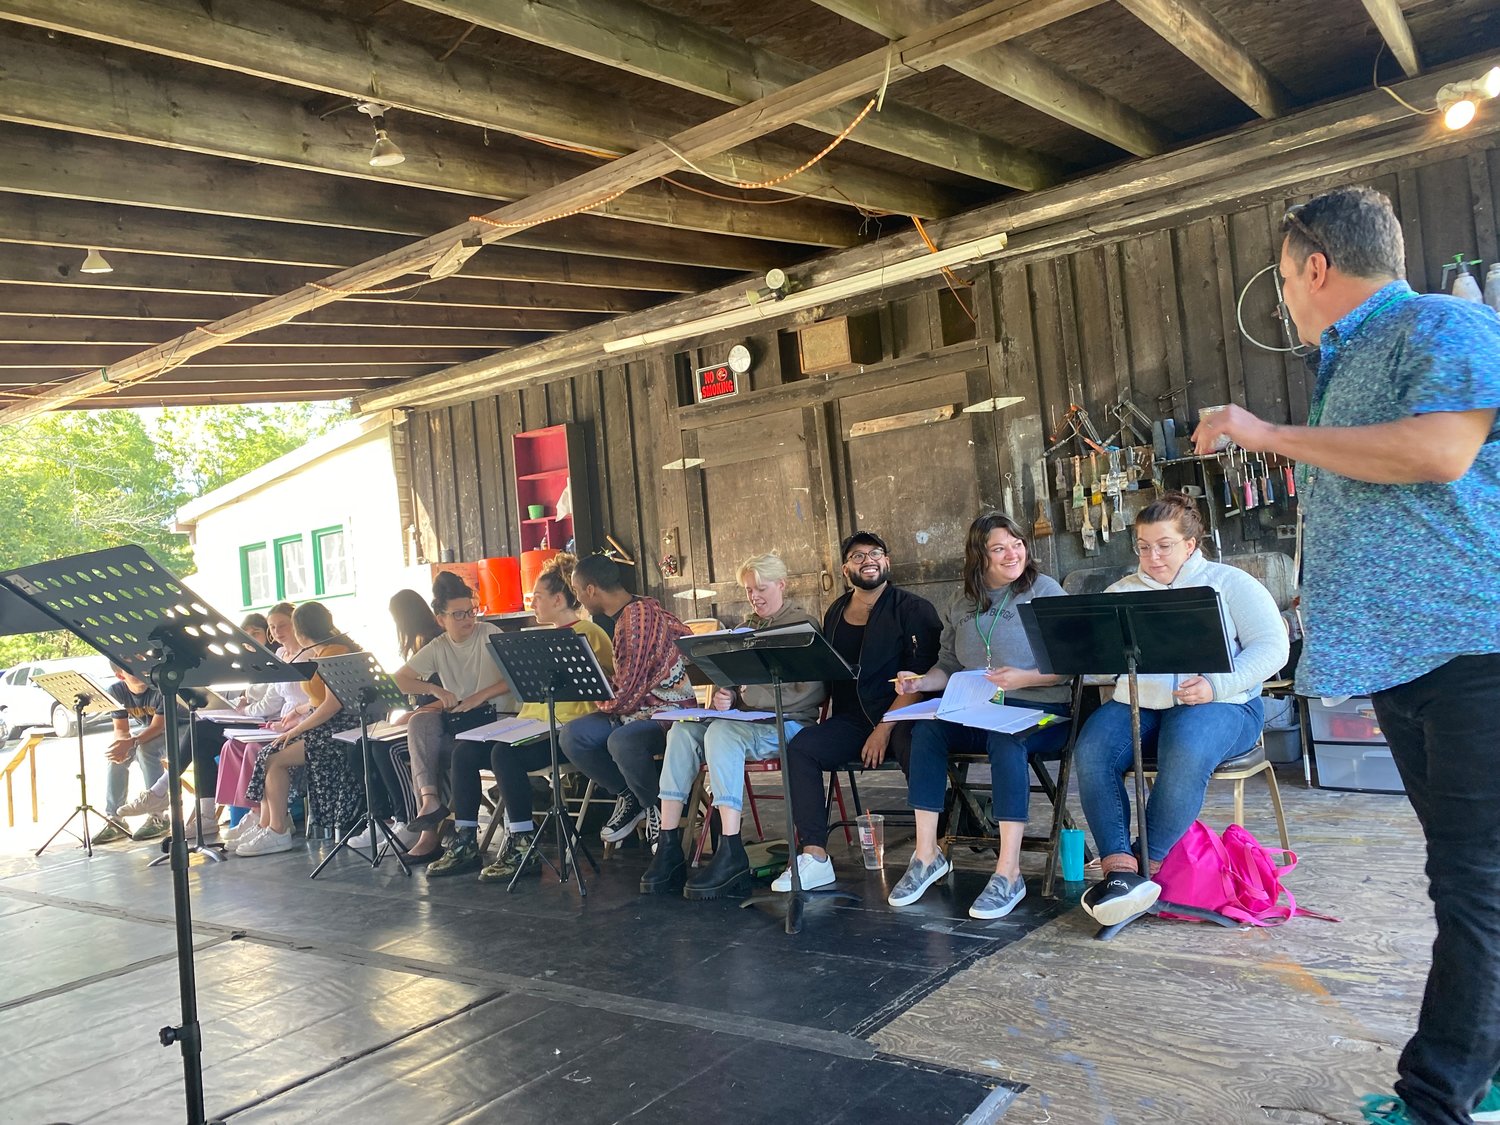 Artistic Director Matt Lenz with the cast of "By Any Other Name" in rehearsal on the back deck at the Forestburgh Playhouse.